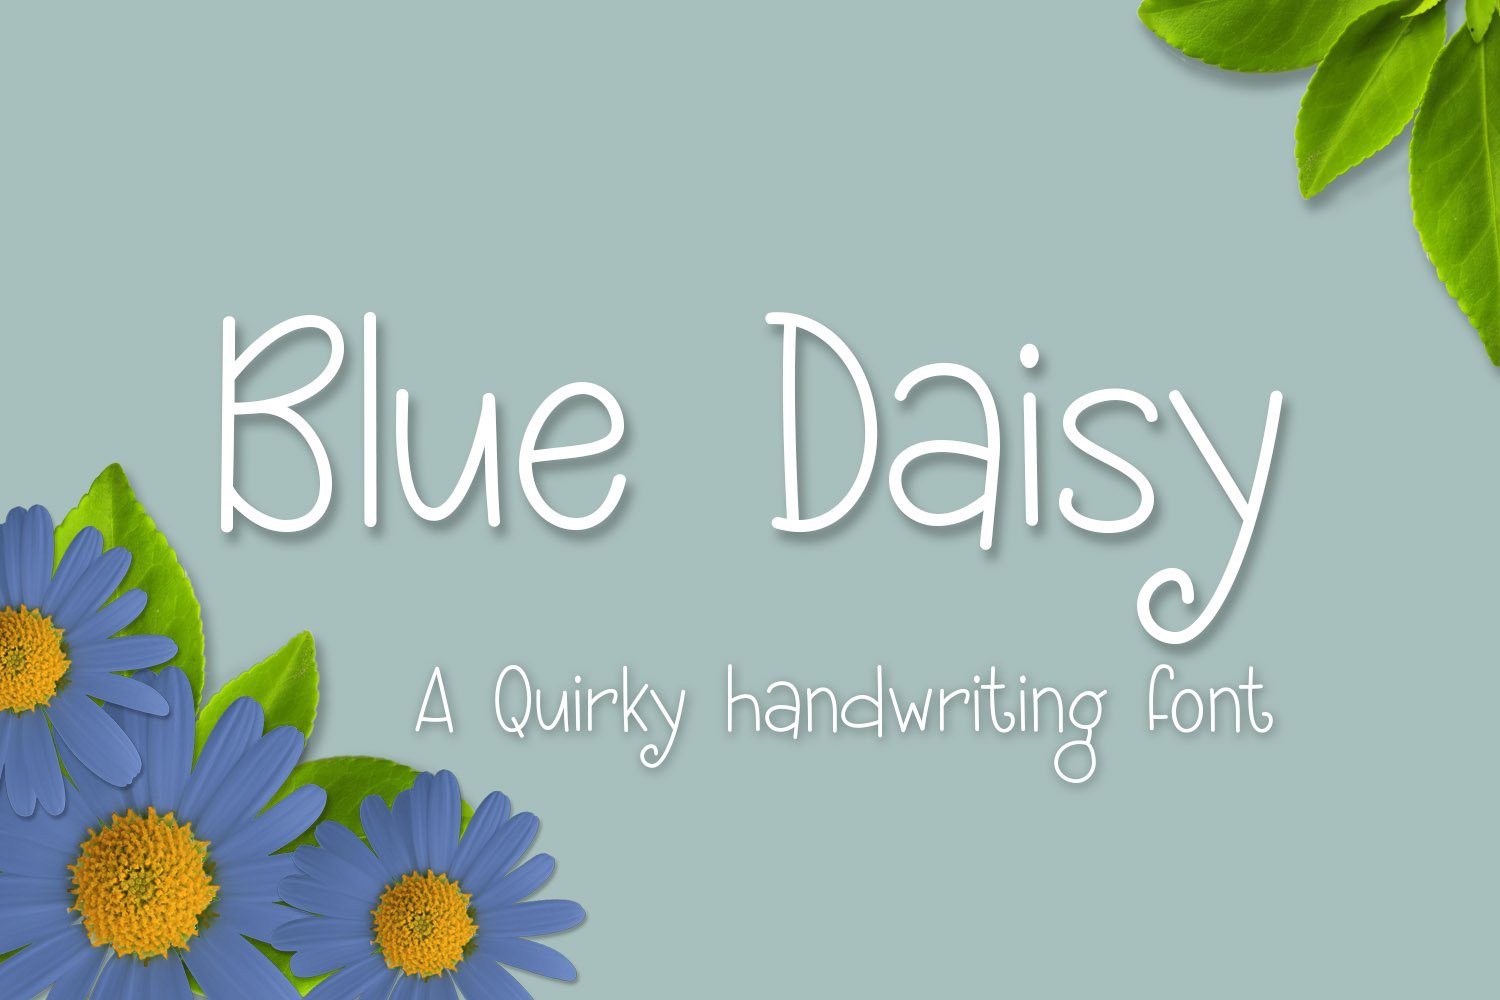 Blue Daisy cover image.